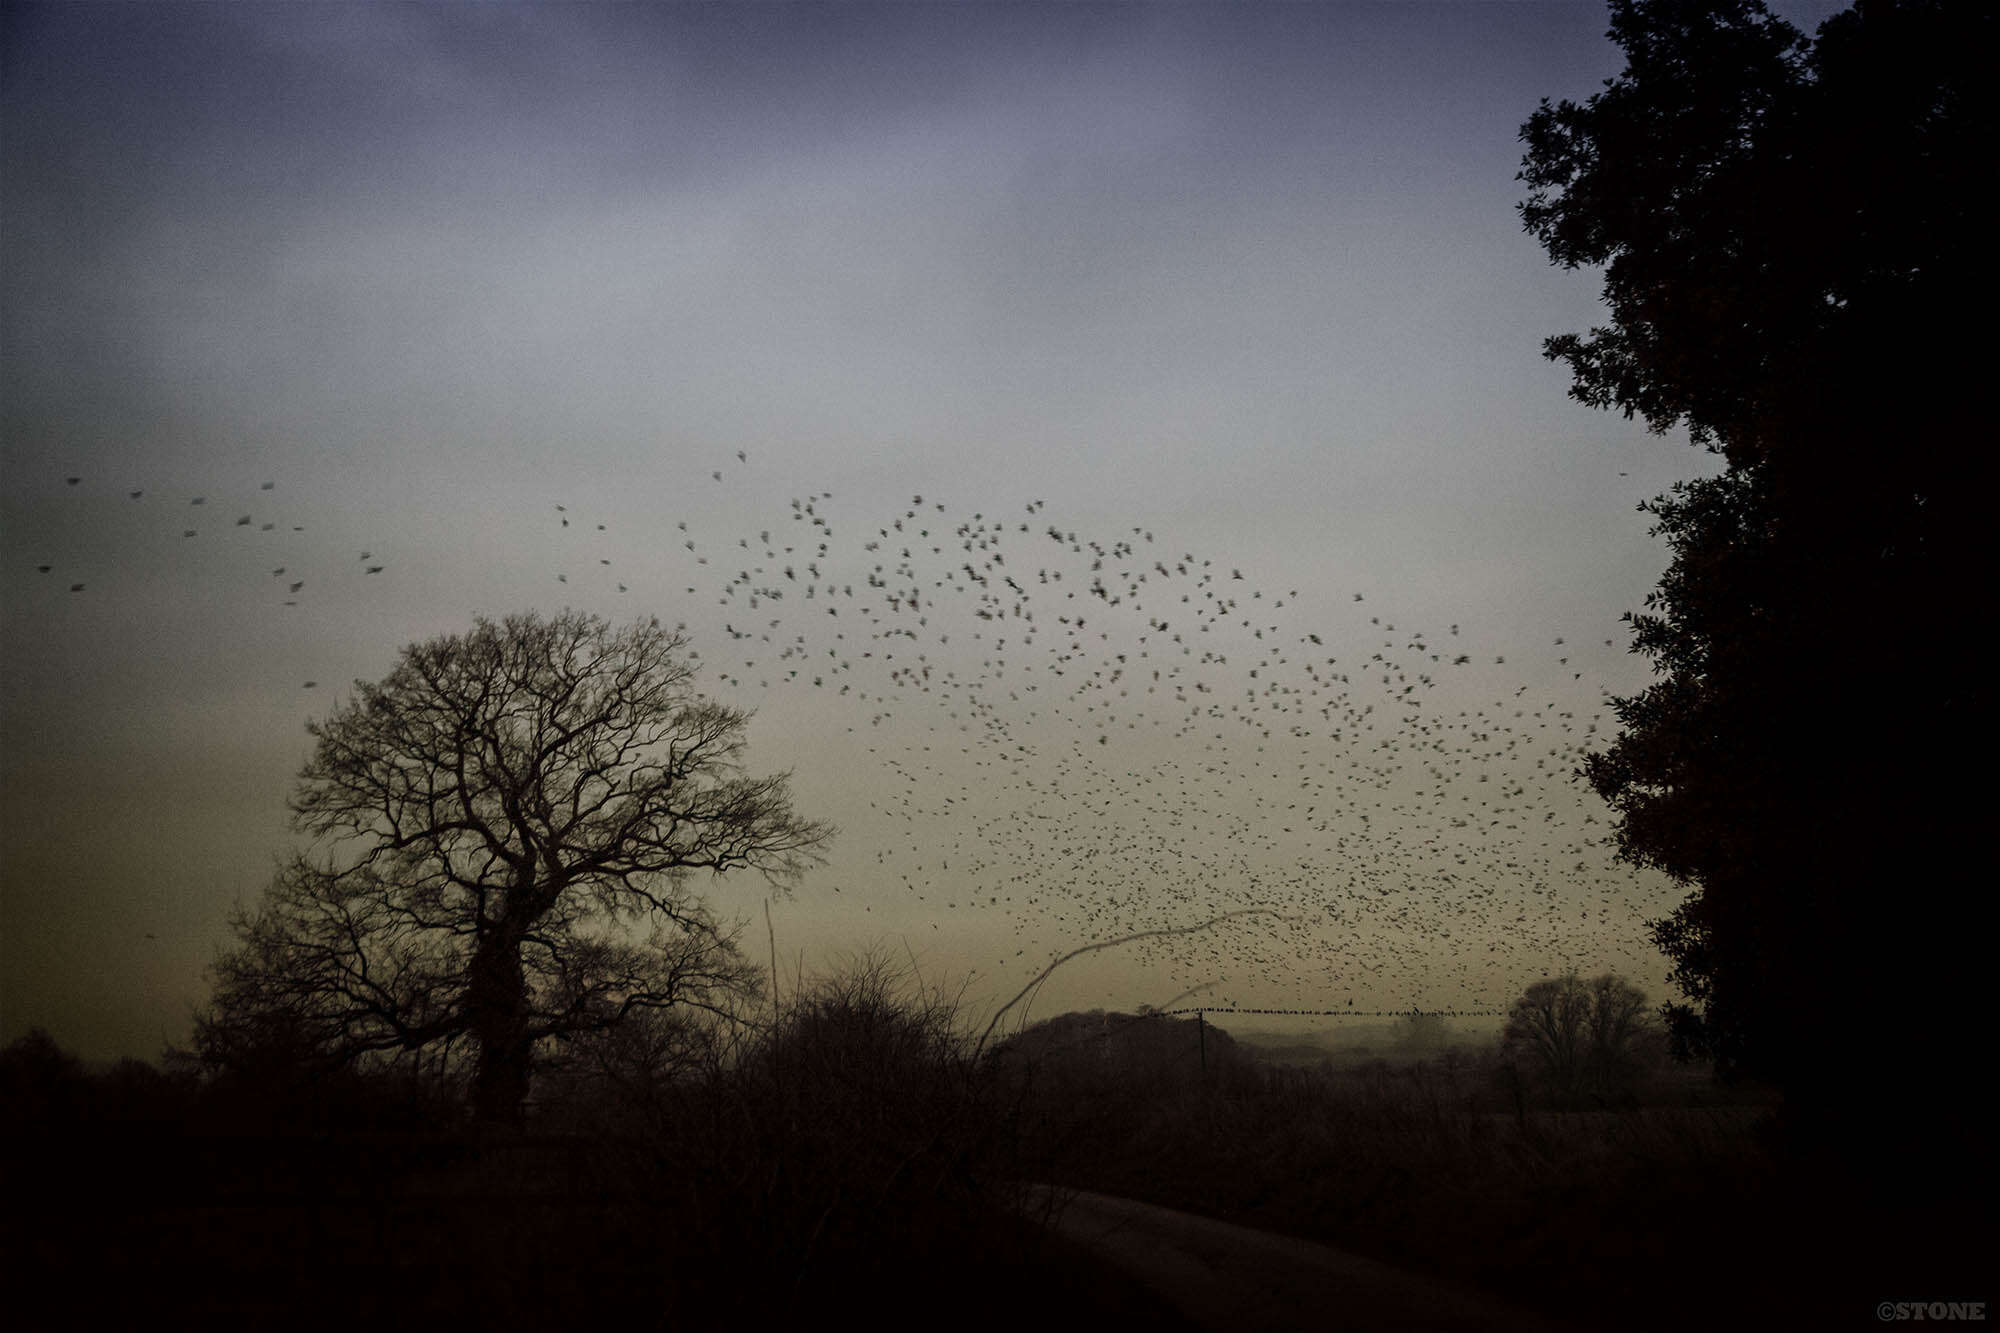 The Corvid Roost at Buckenham Carr, the birds coming in to the main roost.